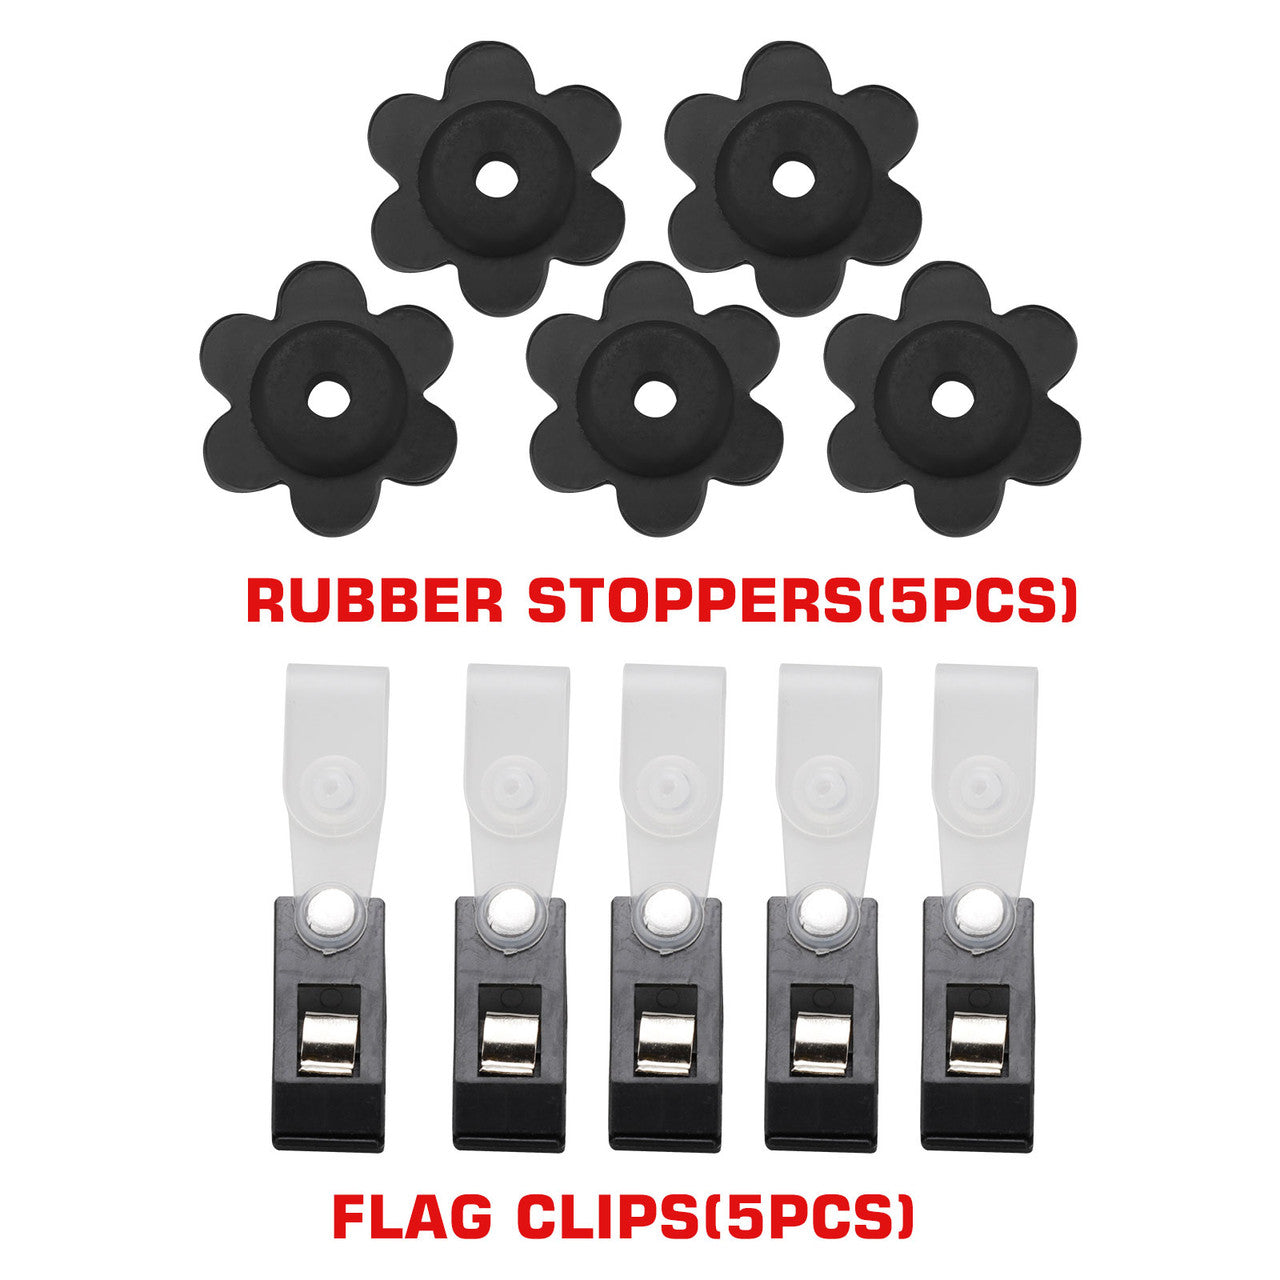 Garden Flag Rubber Stoppers and Anti-Wind Clips for Garden Flag Poles Stands, DIY Craft Banner Garden Decoration, 1 Pack